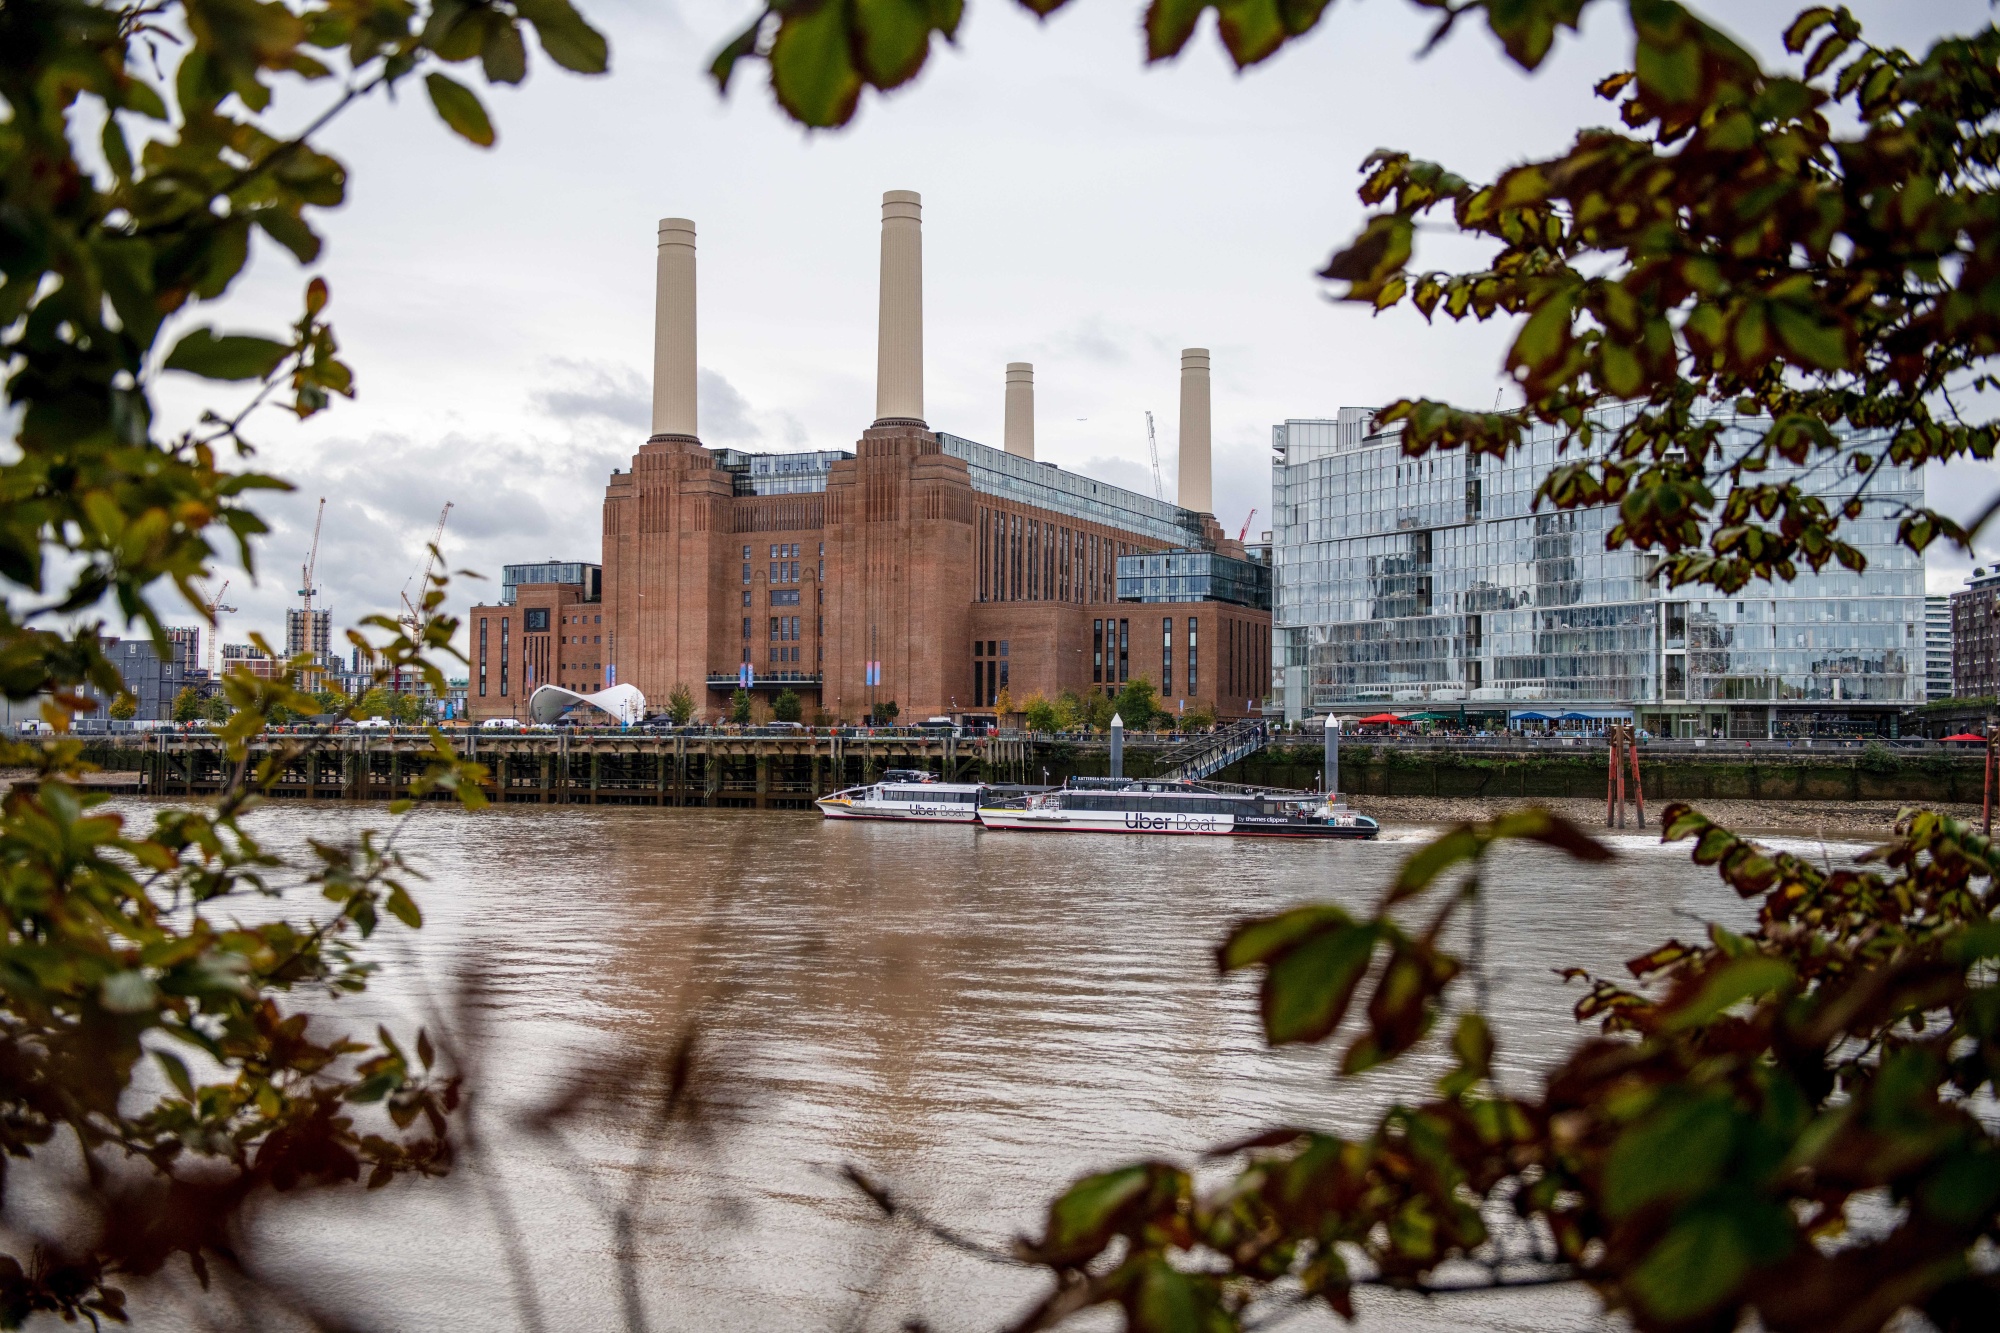 Long-awaited redevelopment of iconic Battersea Power Station completes